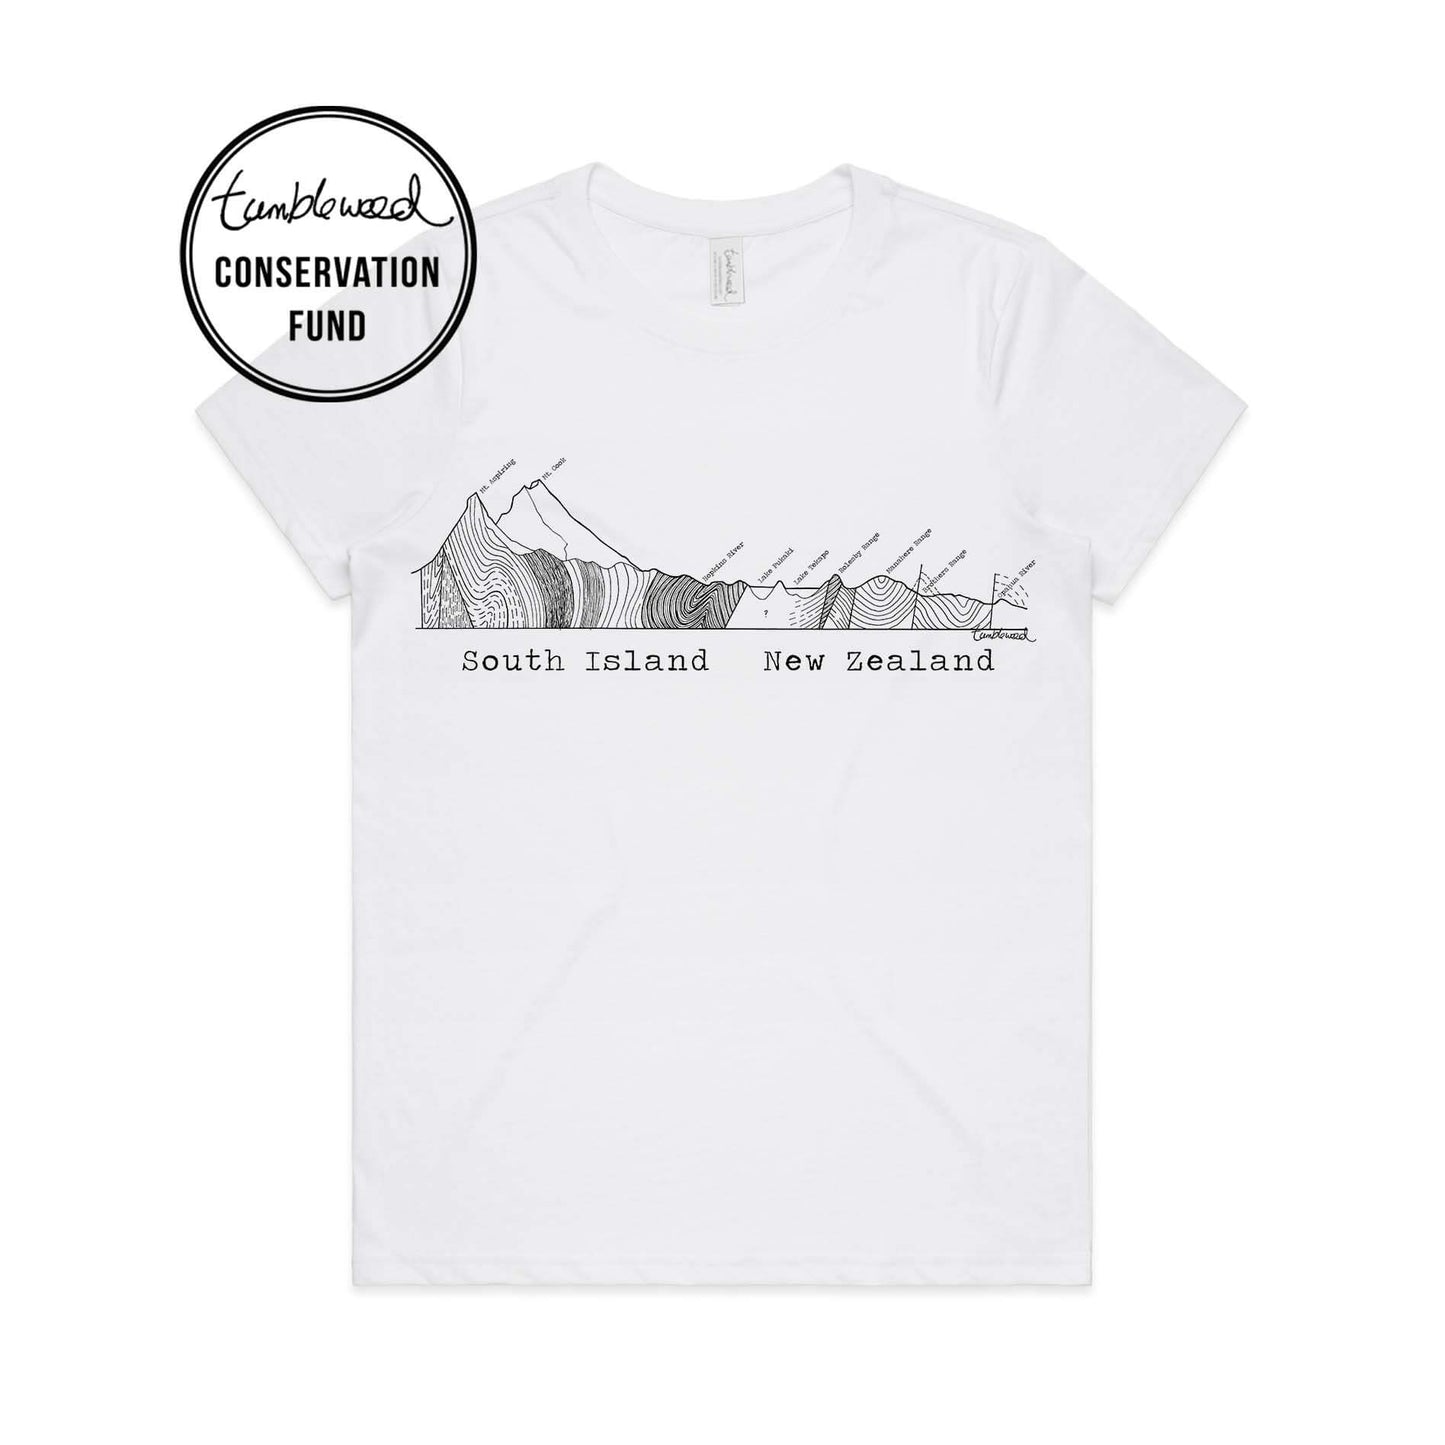 White, female t-shirt featuring a screen printed South Island Cross Section design.